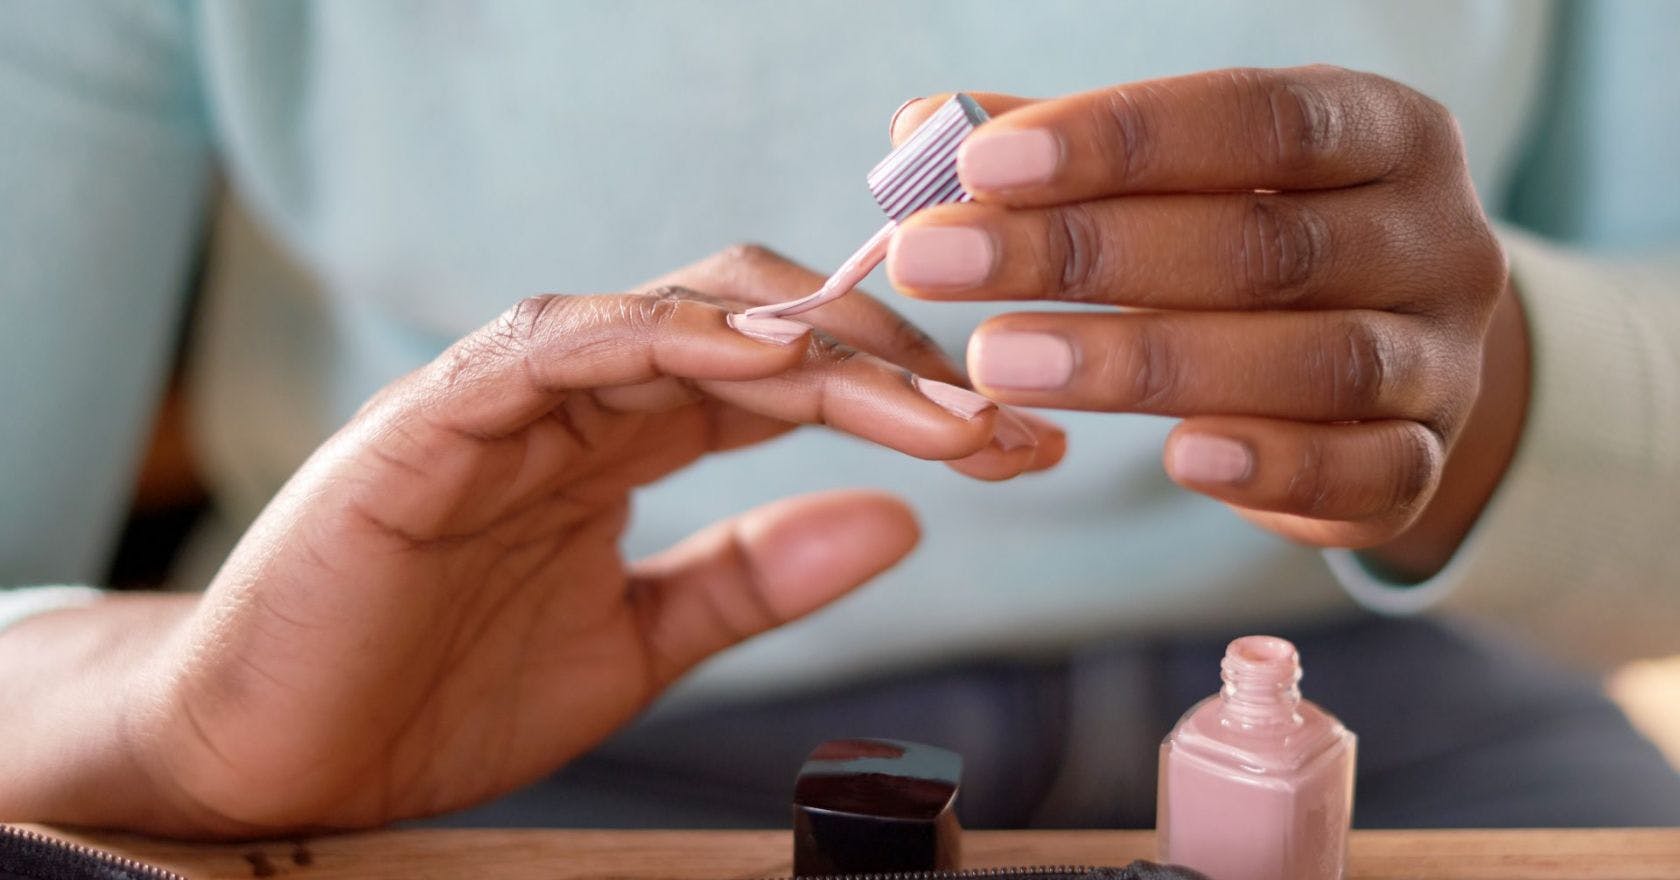 How to Make Your Nail Polish Dry Faster - wide 7